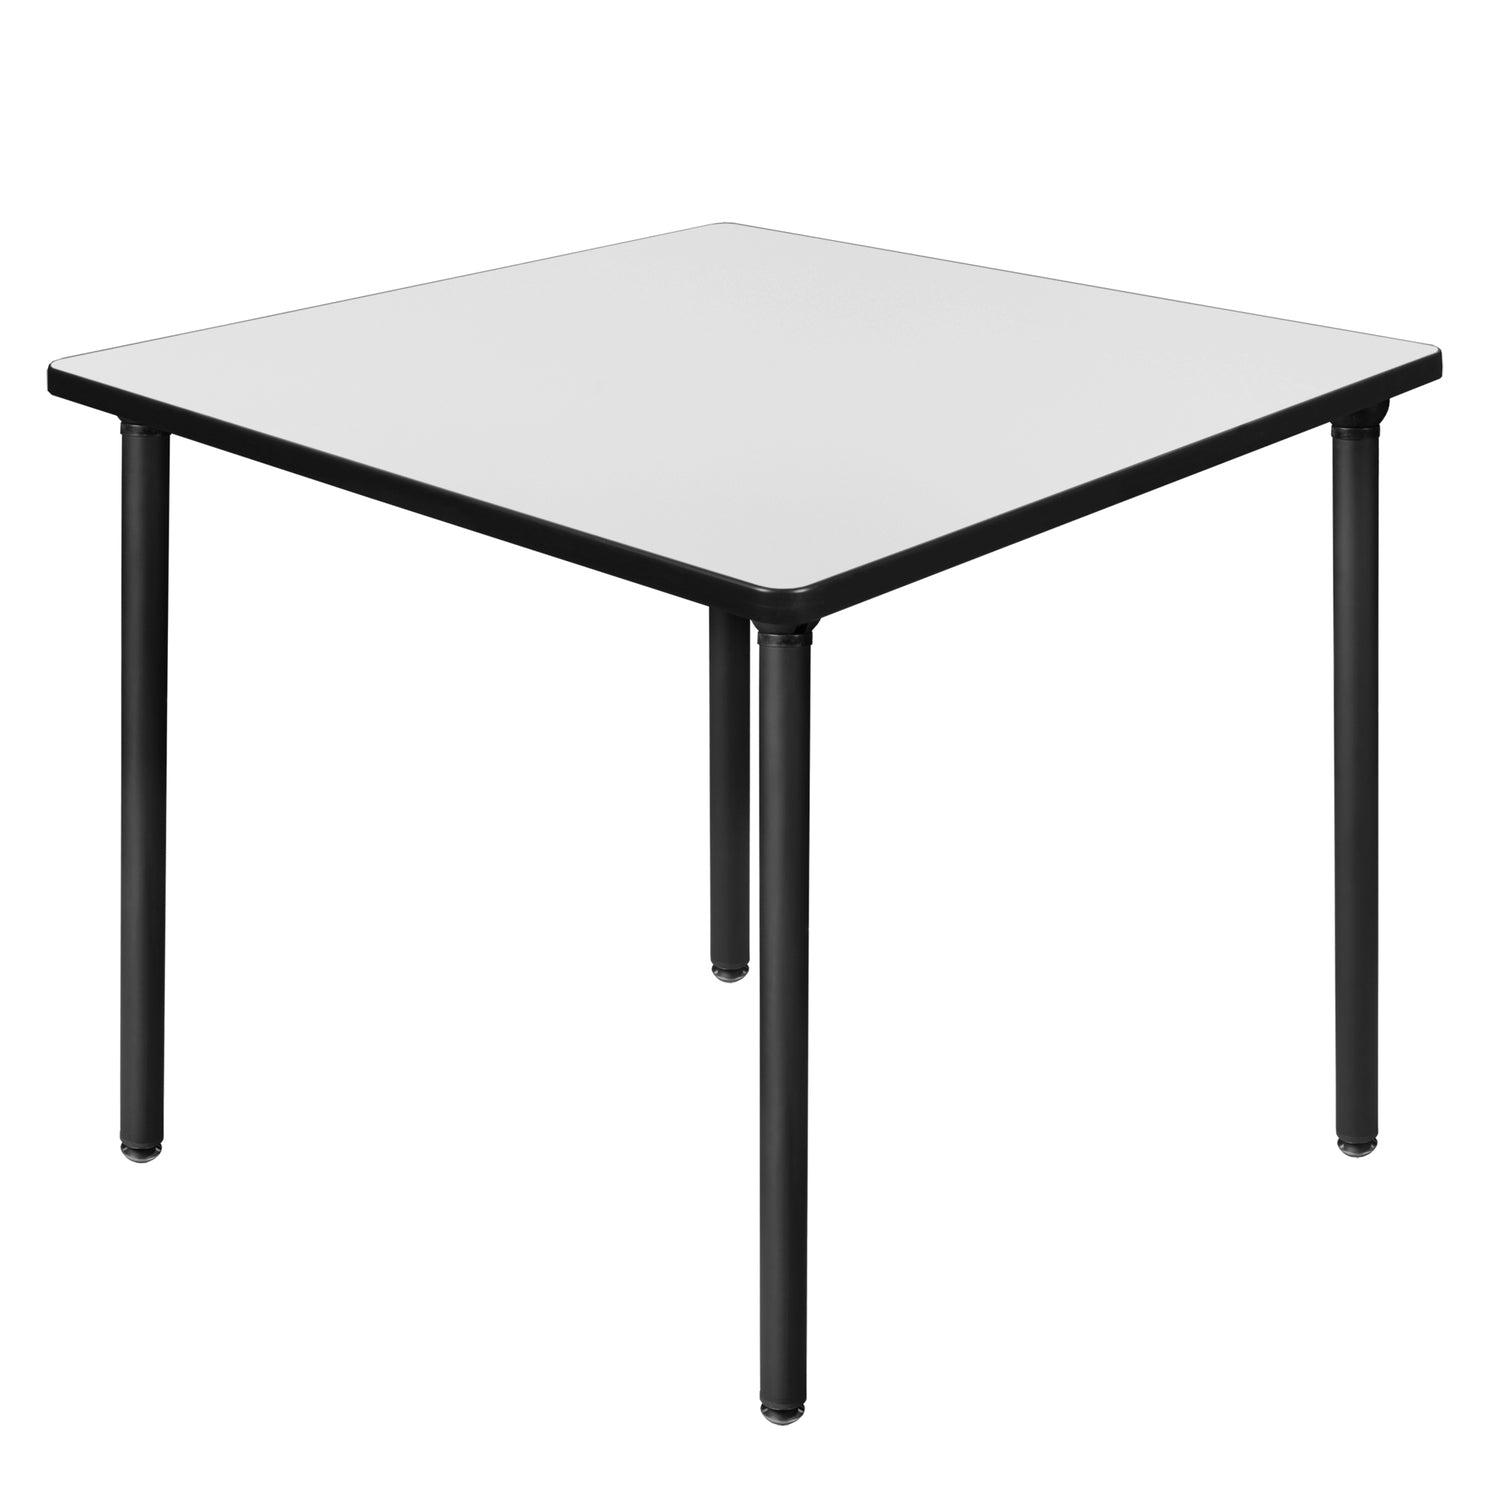 Kee 42" Square Folding Breakroom Table